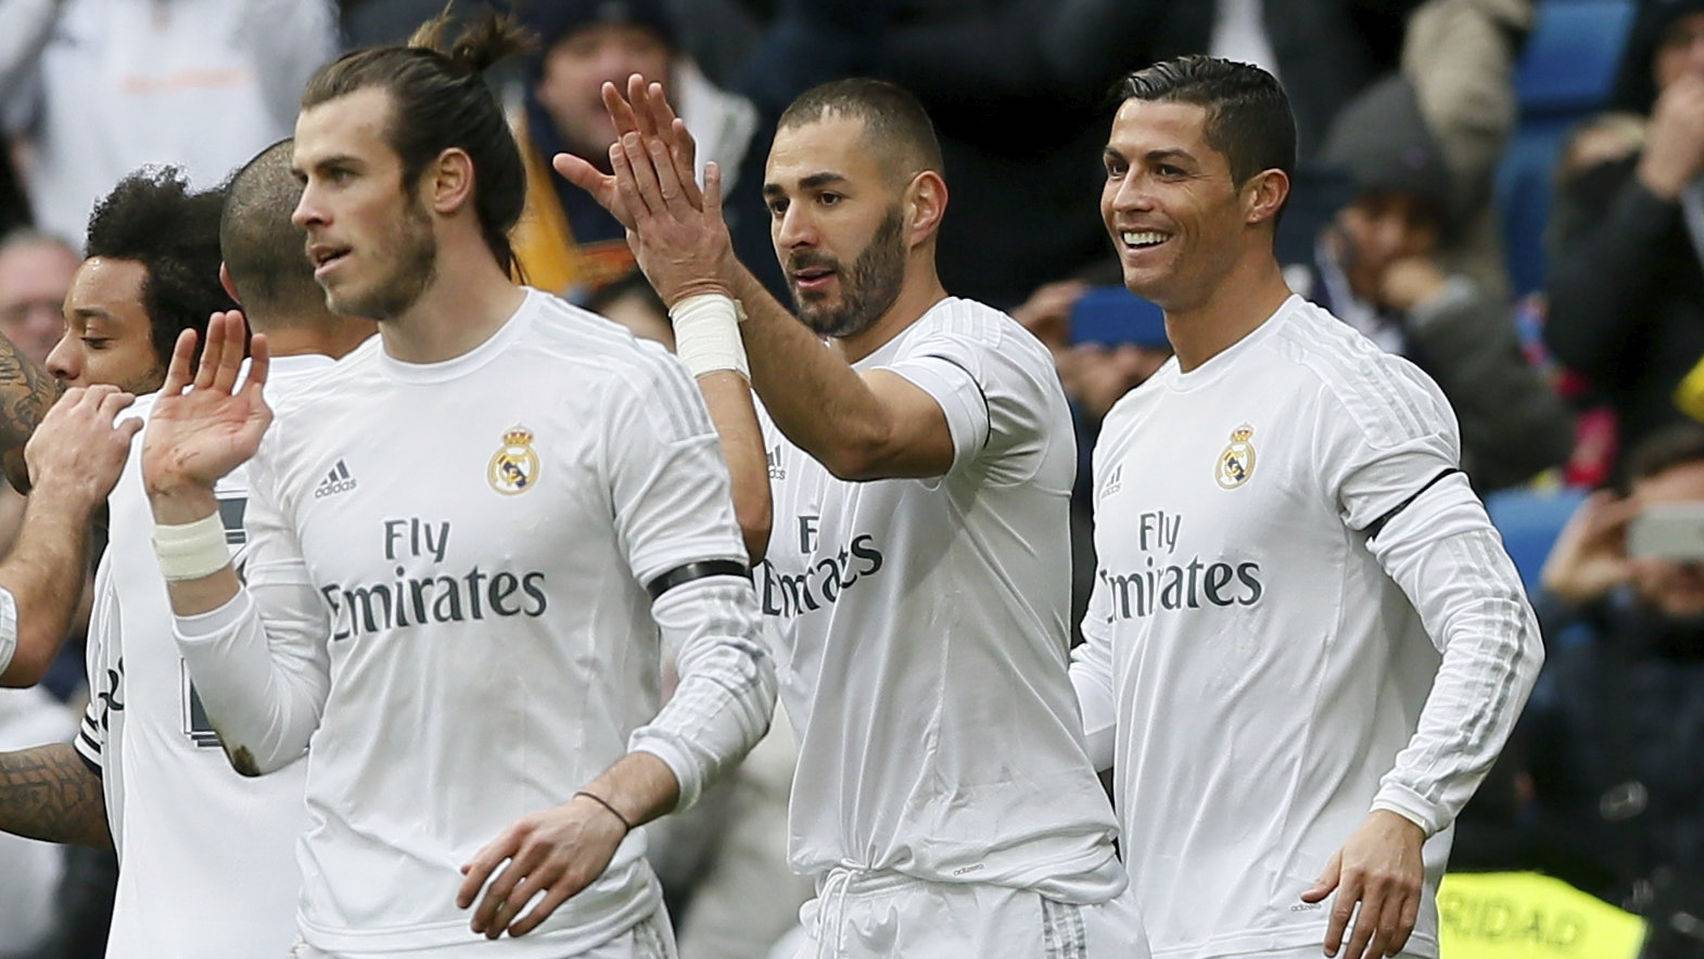 It bleat, Benzema and Cristiano, celebrating a goal